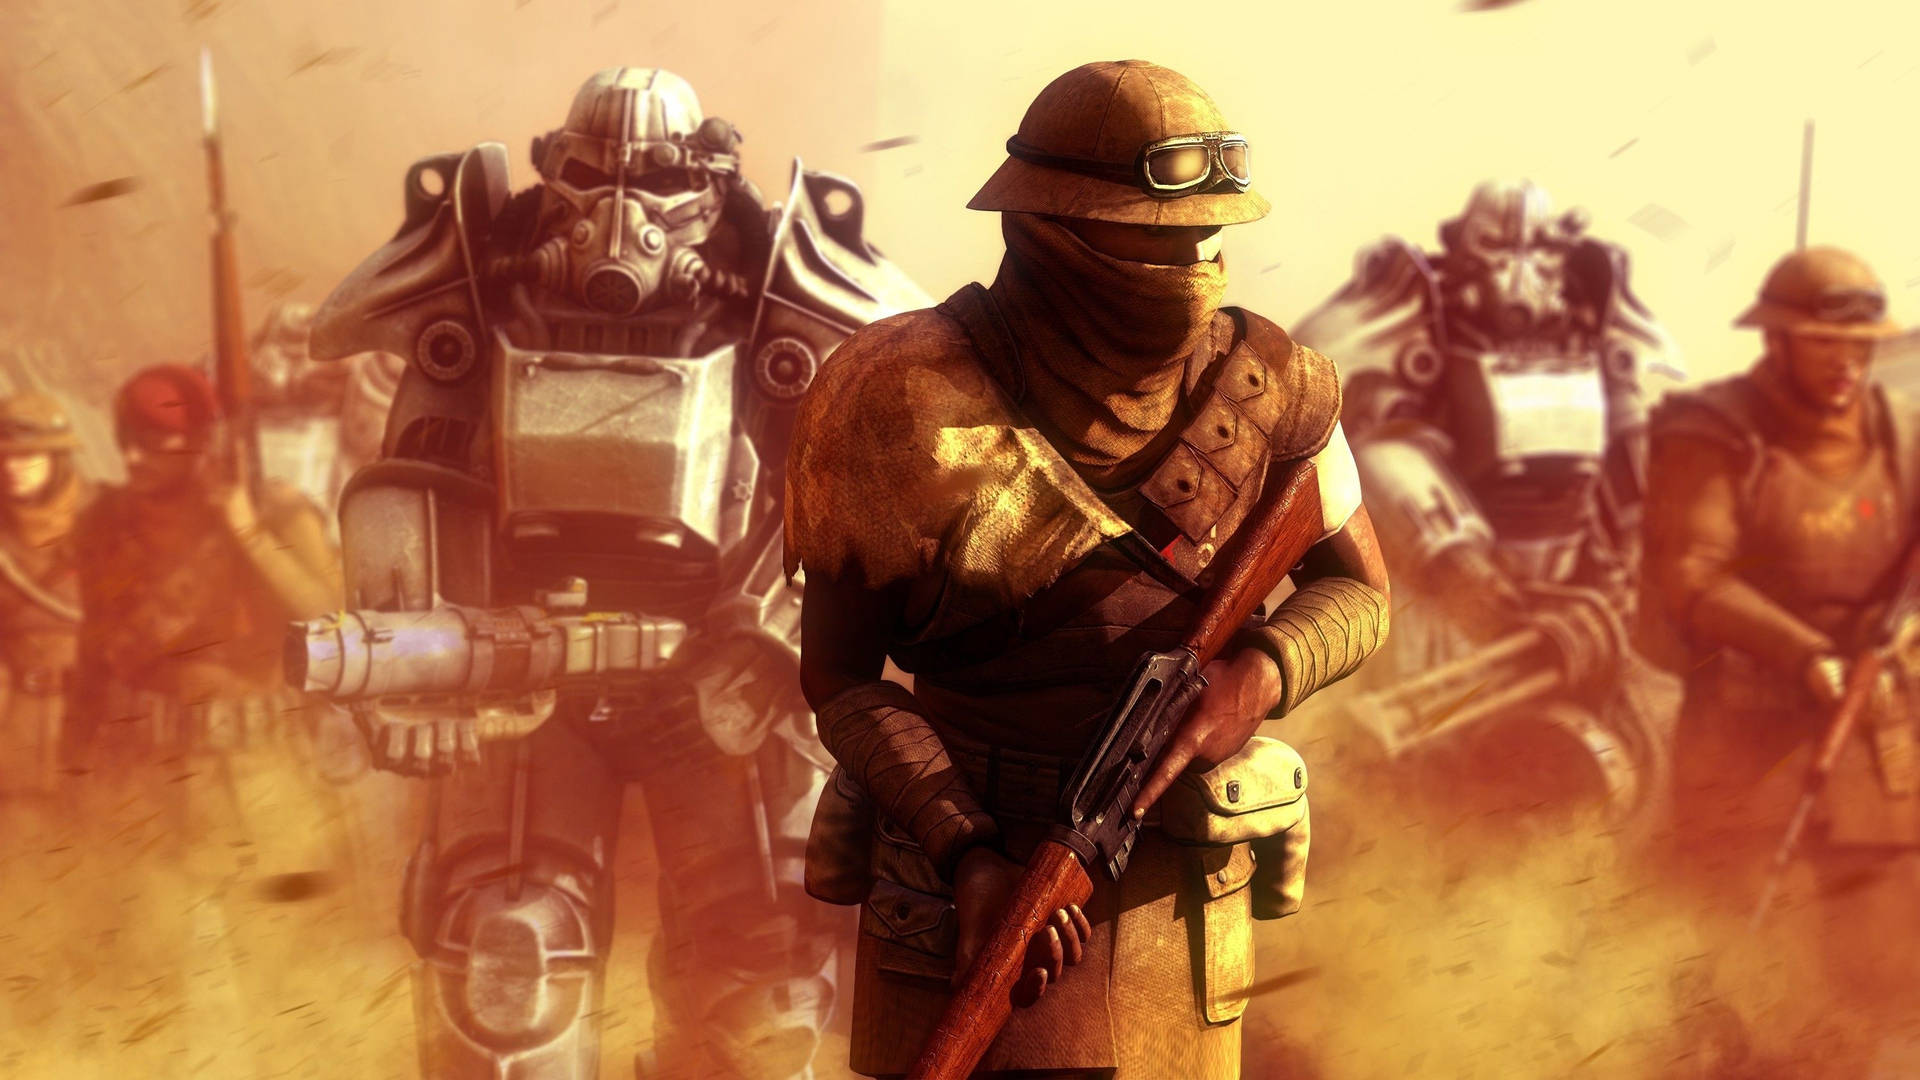 Join the New California Republic in Fallout: New Vegas. Wallpaper